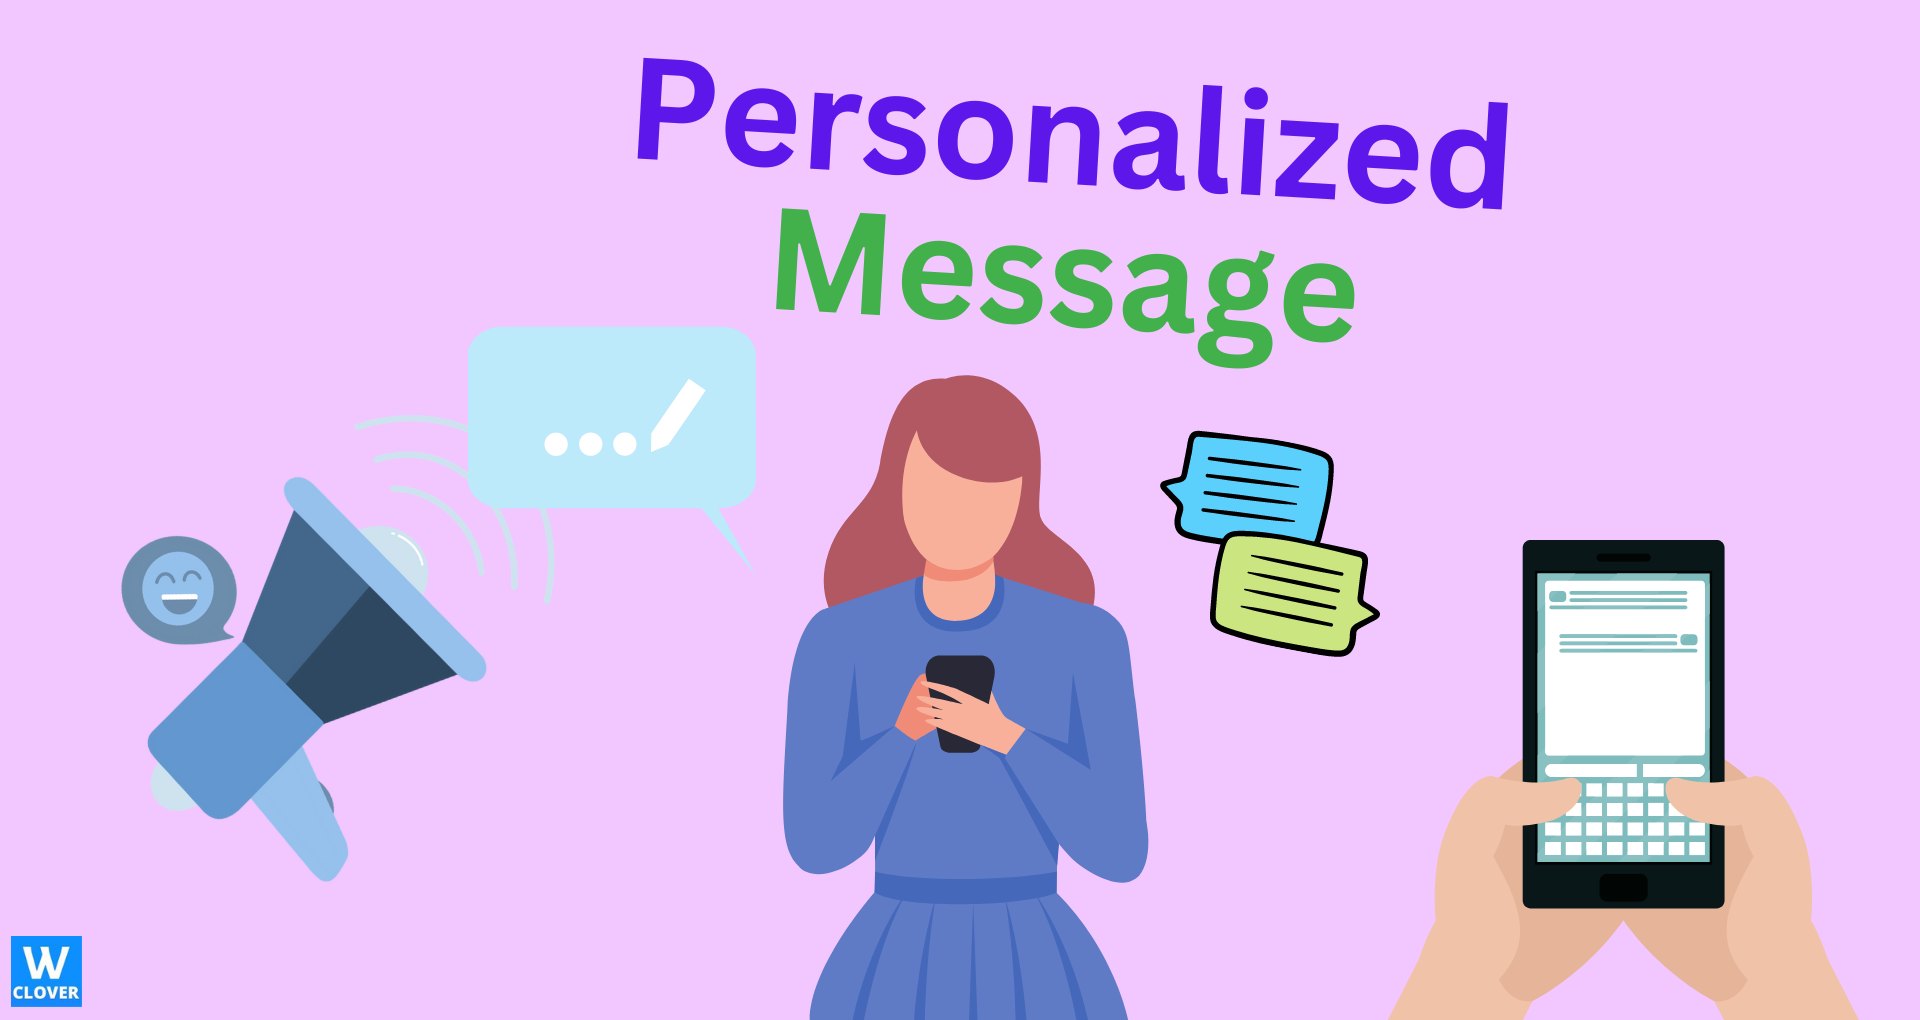 Personalized message infographic with girl on mobile phone on light purple background